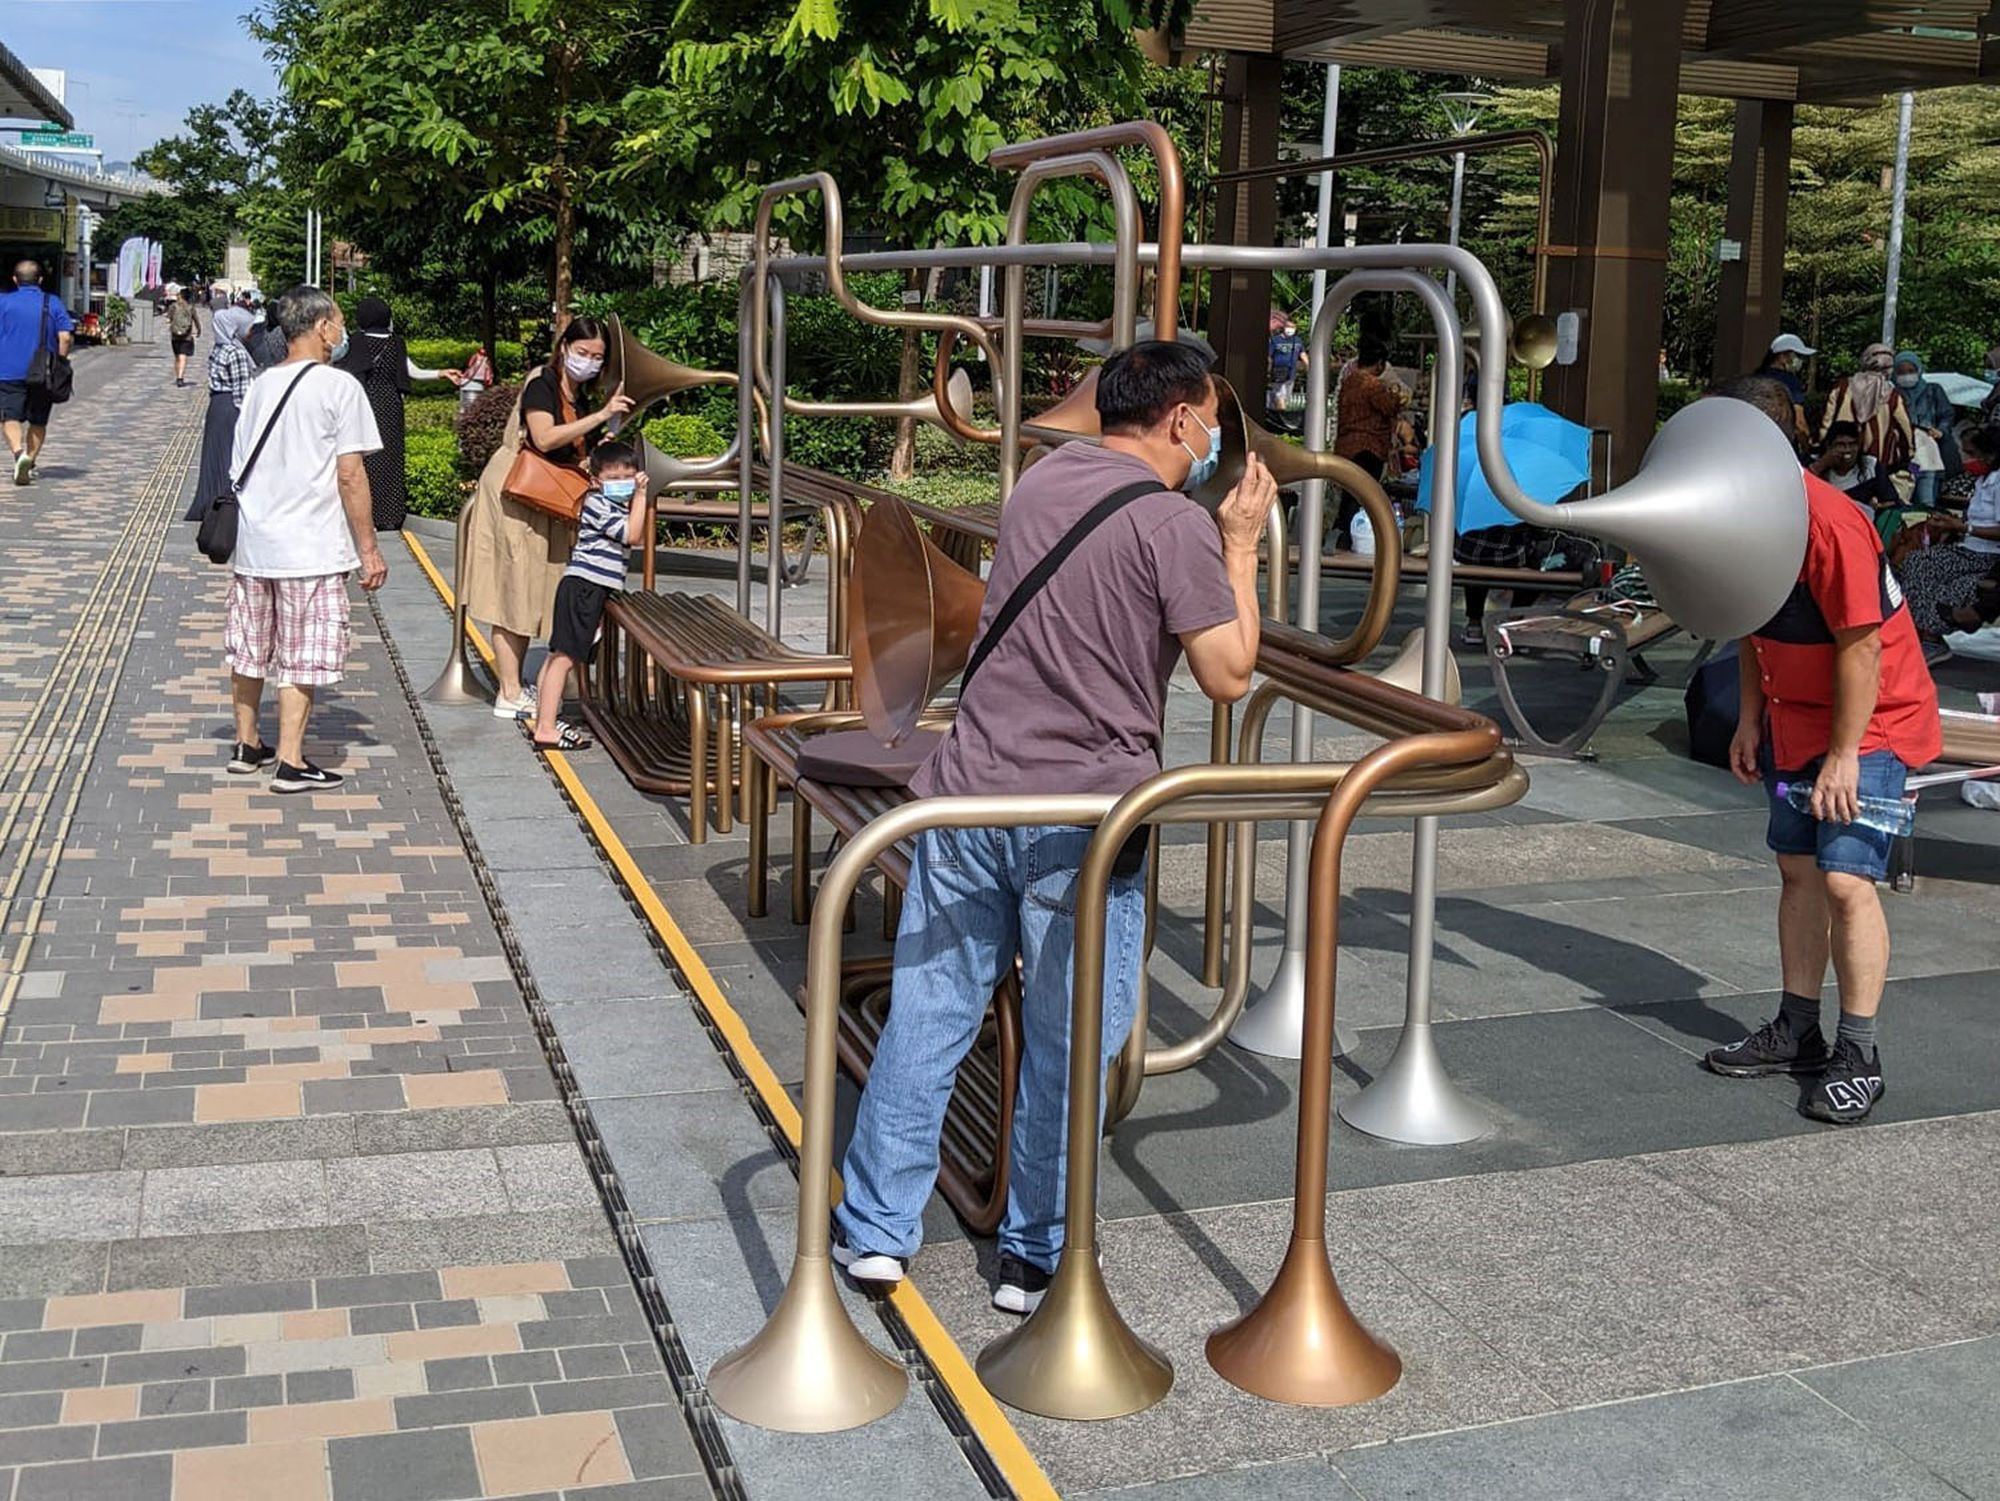 Funded by the URF, the “Via North Point” project features an array of artwork installations set up in Chun Yeung Street Sitting-Out Area, the North Point promenade and the North Point Ferry Pier to rejuvenate public spaces and showcase the unique glamour of North Point.